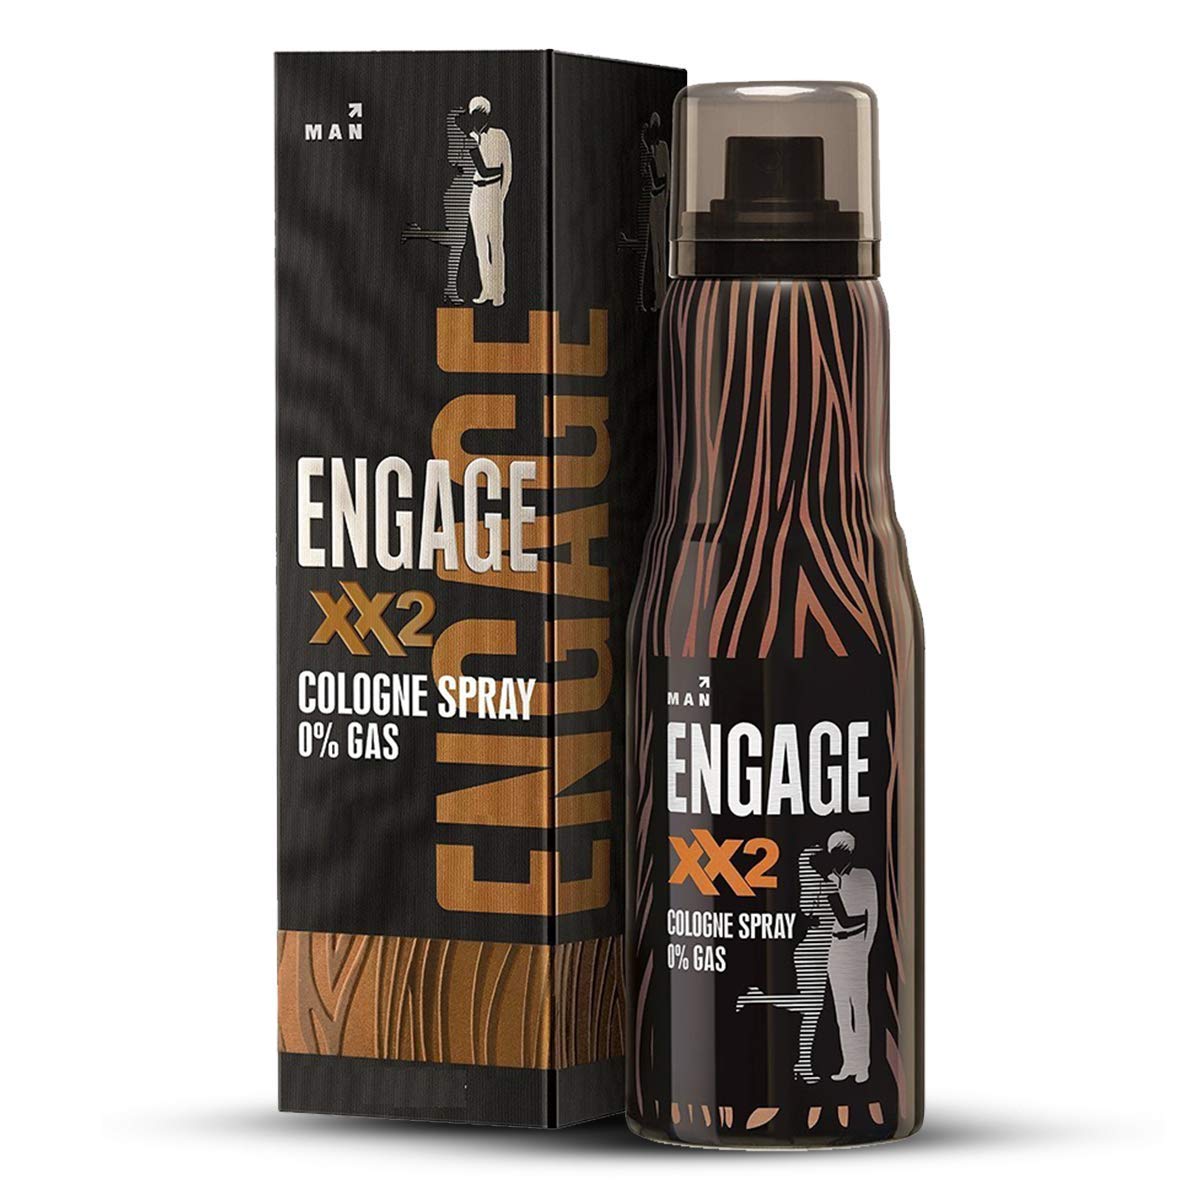 Engage Cologne Spray XX2 for Men - 135ml